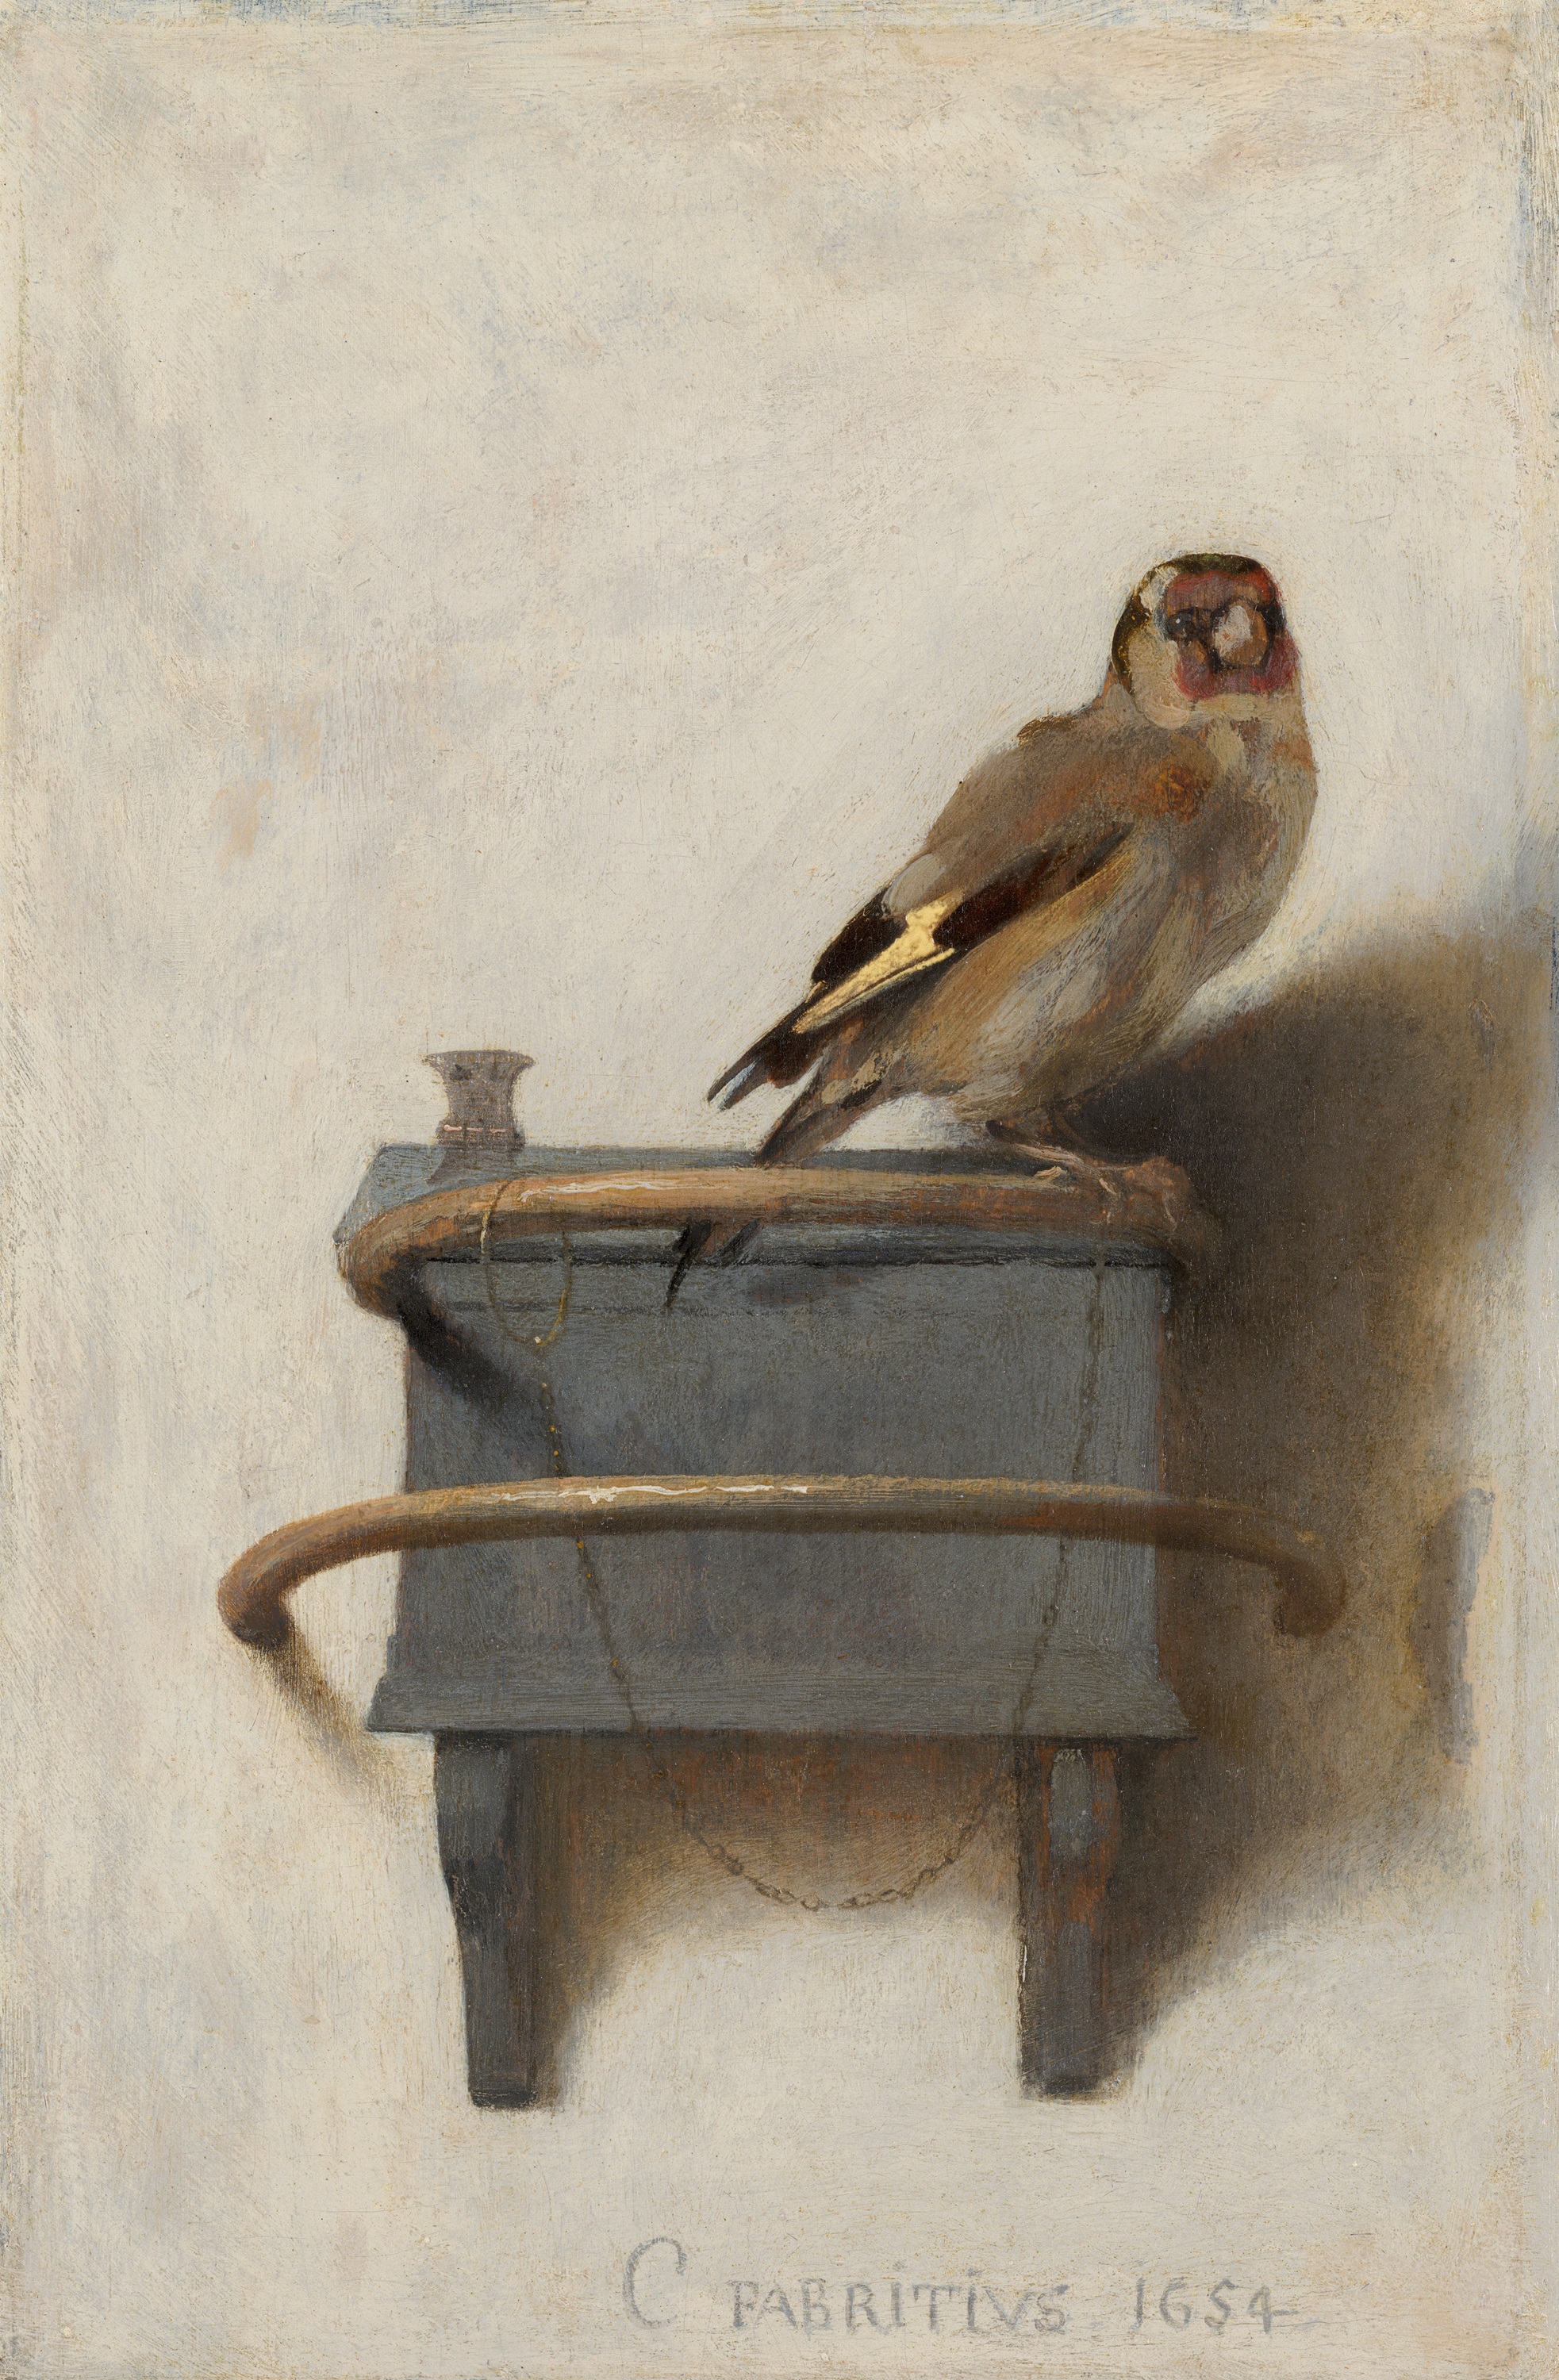 The Goldfinch by Carel Fabritius - 1654 - 34 x 23 cm Mauritshuis, The Hague